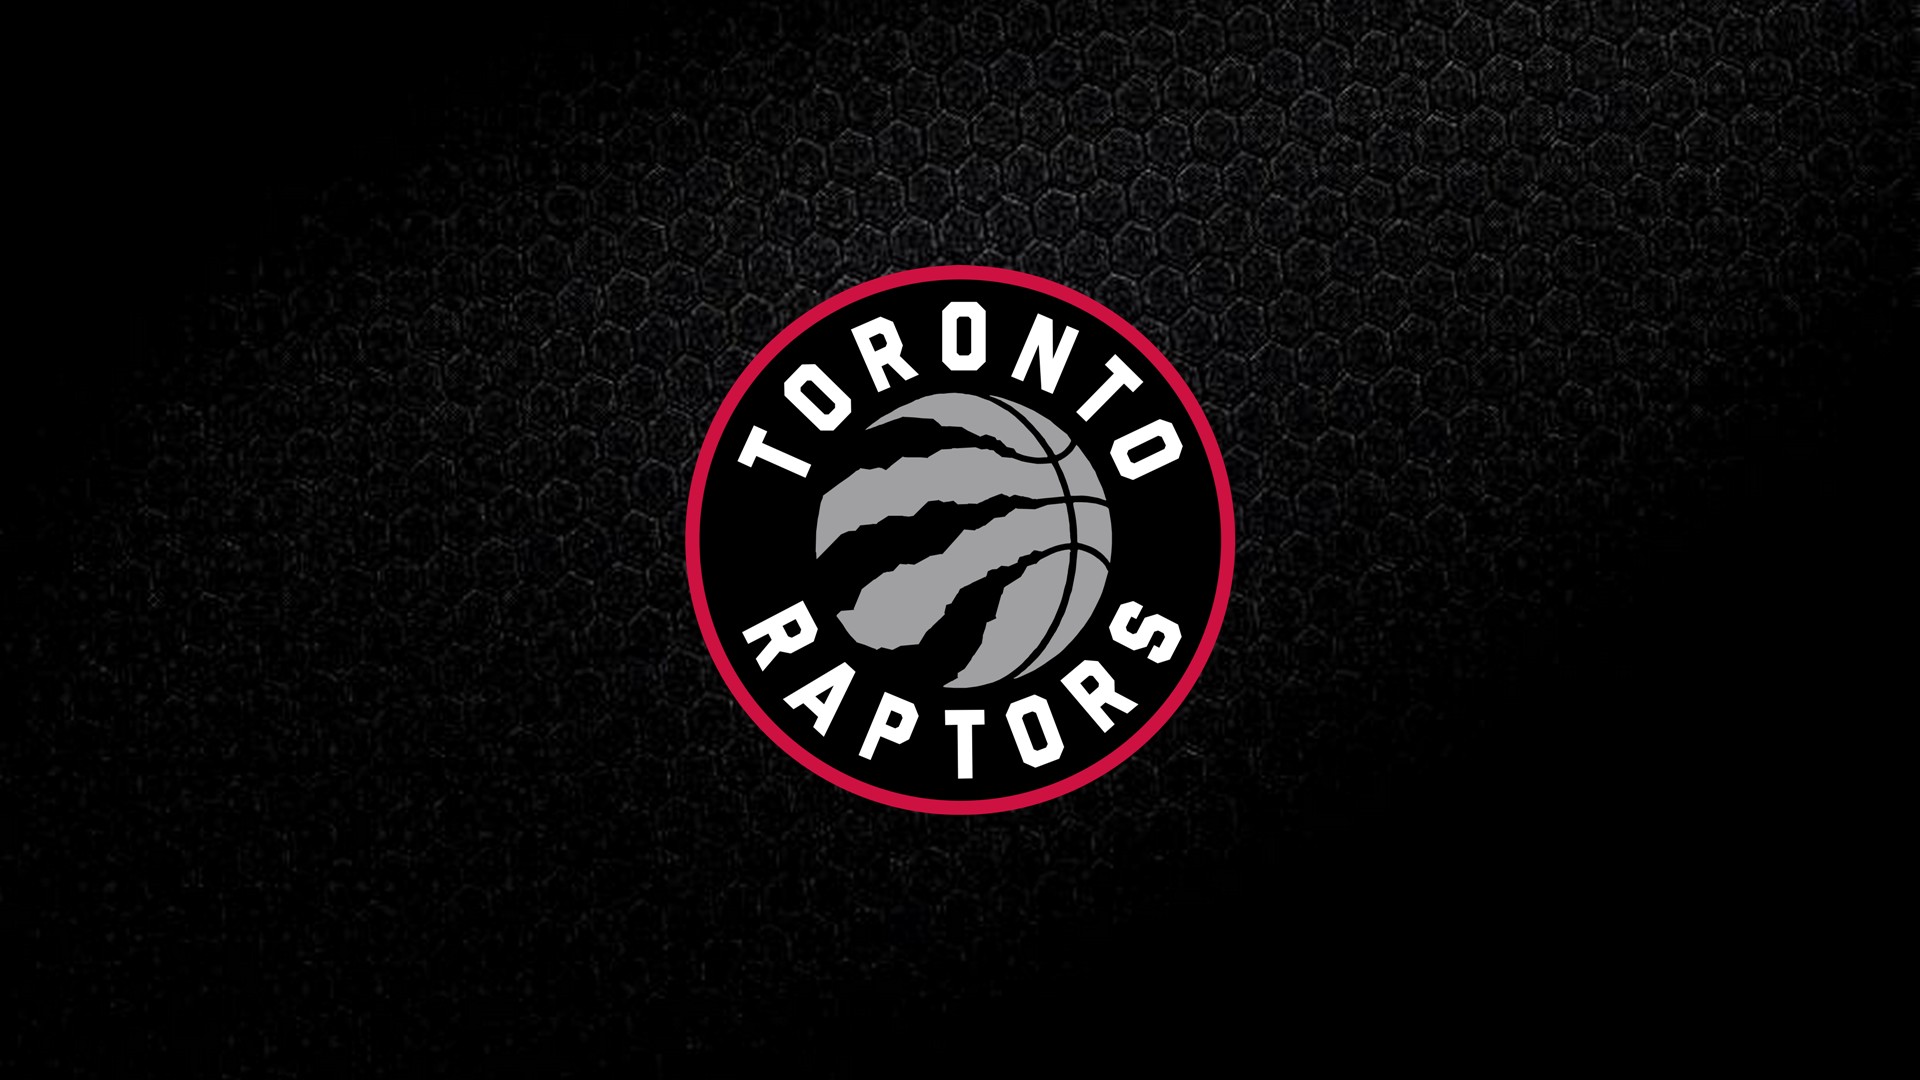 HD Wallpaper Toronto Raptors with image resolution 1920x1080 pixel. You can make this wallpaper for your Desktop Computer Backgrounds, Mac Wallpapers, Android Lock screen or iPhone Screensavers